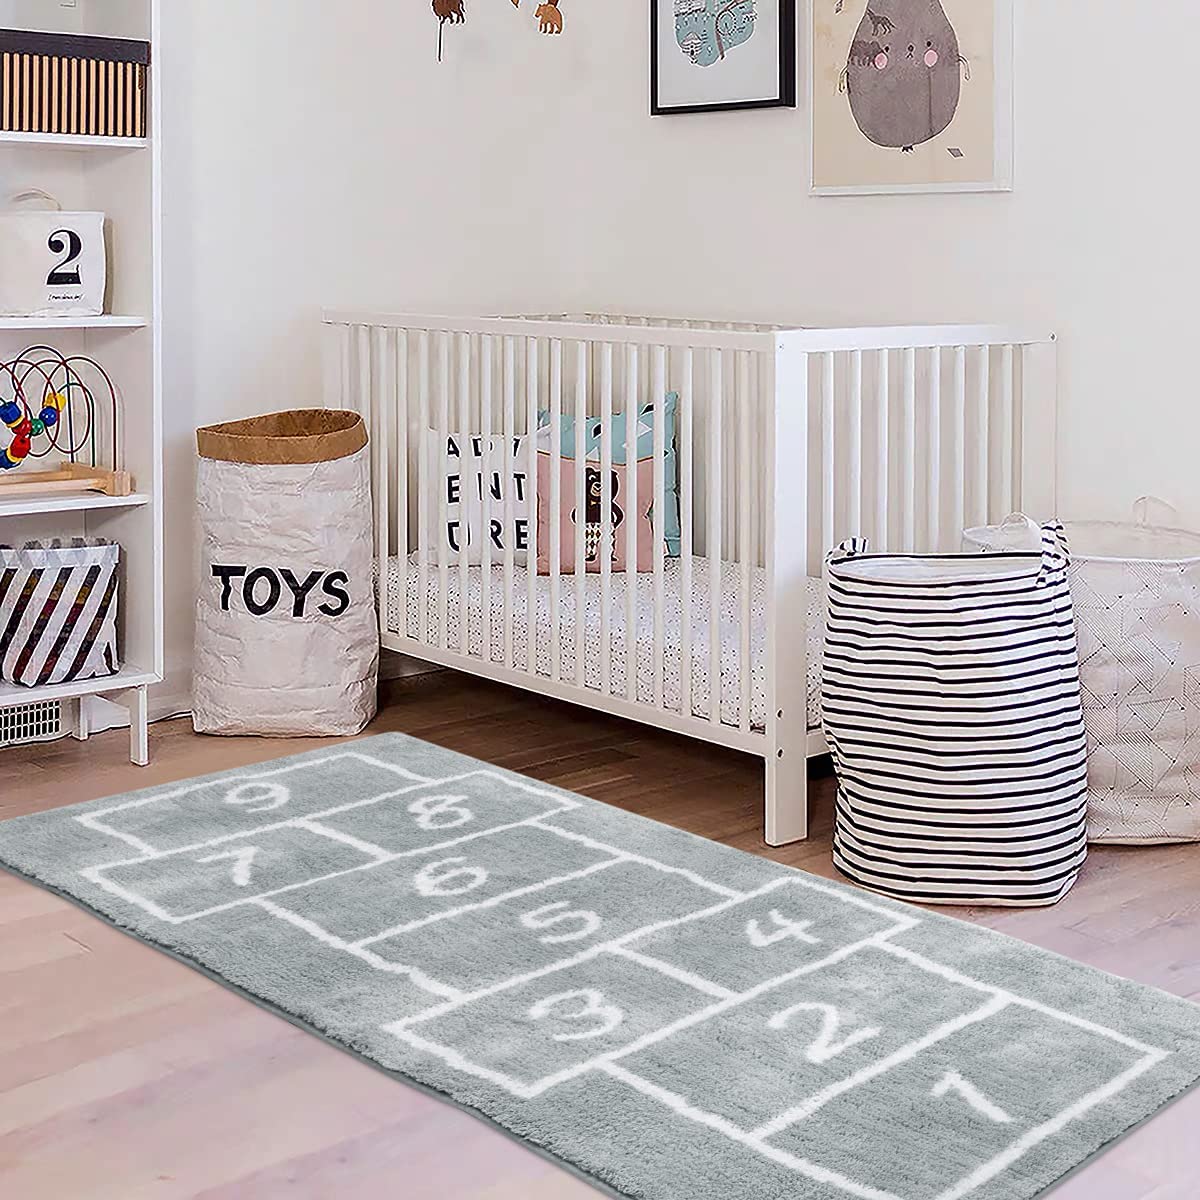 Baby and child bedroom carpet